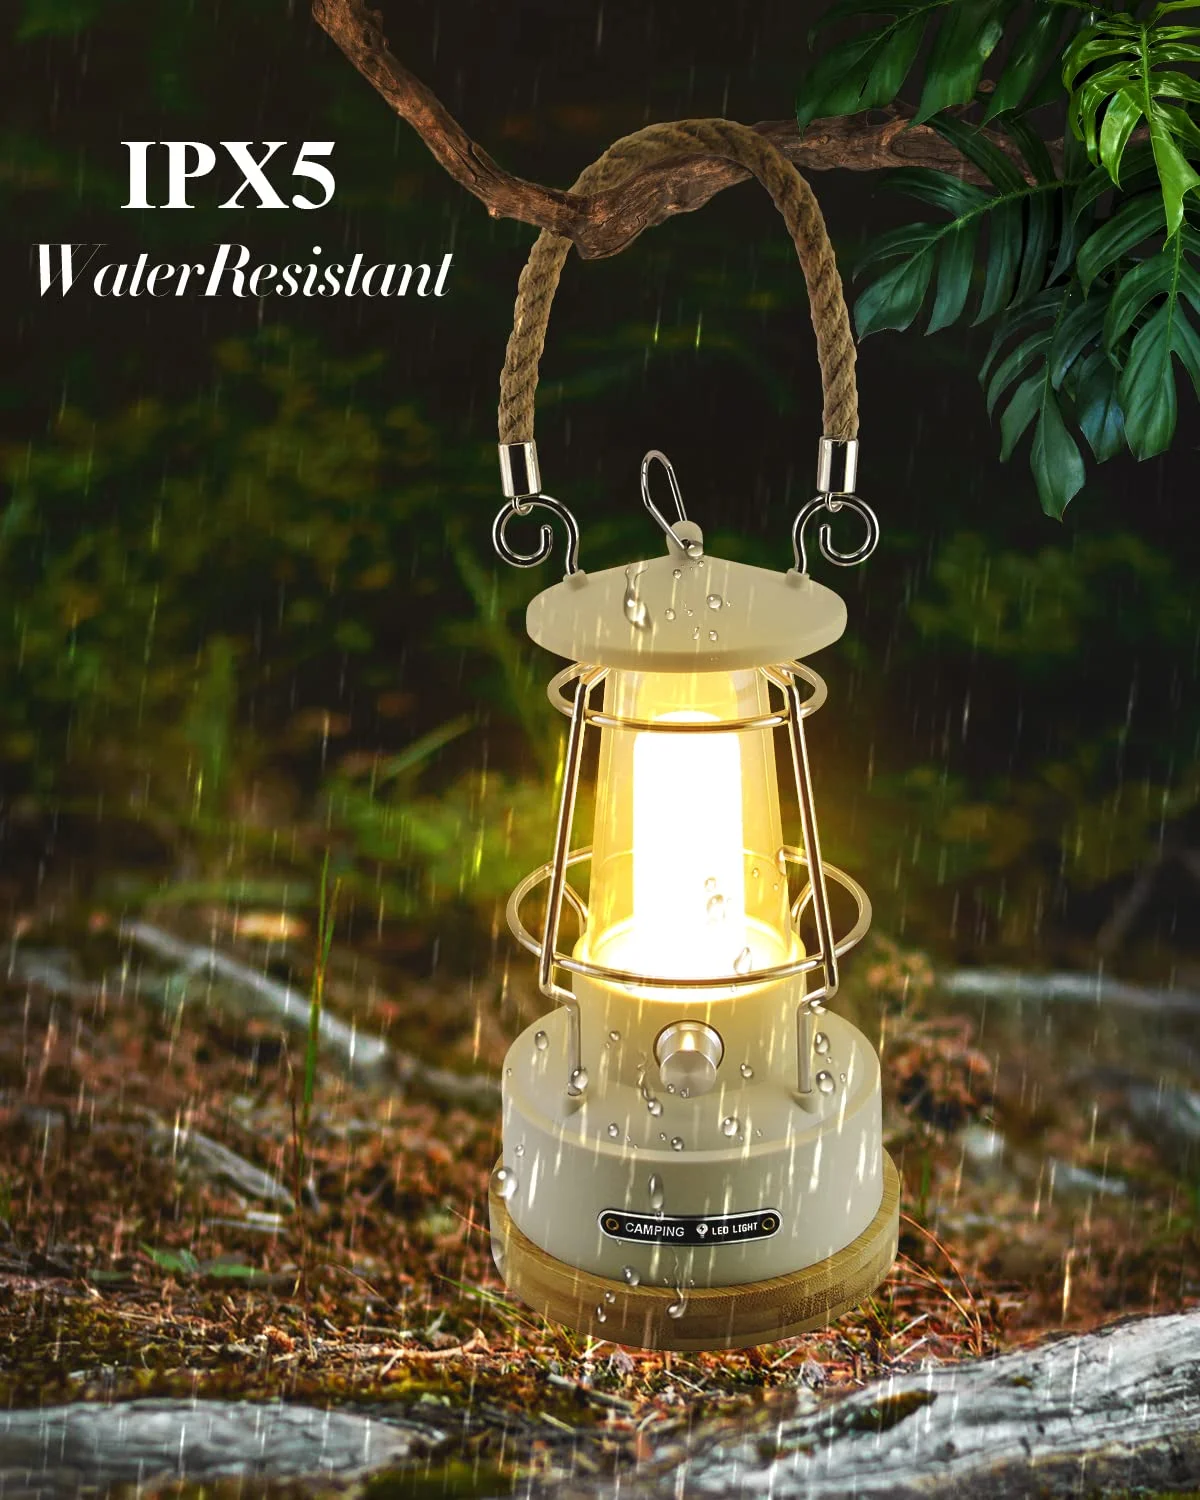 https://ae01.alicdn.com/kf/S29a1bd7dfaba47a08203cadb538a9023X/Camping-Lantern-Rechargeable-Dimmable-LED-Vintage-Lanterns-Battery-Powered-Lanterns-for-Power-Outages-for-Camping-Hurricane.jpg